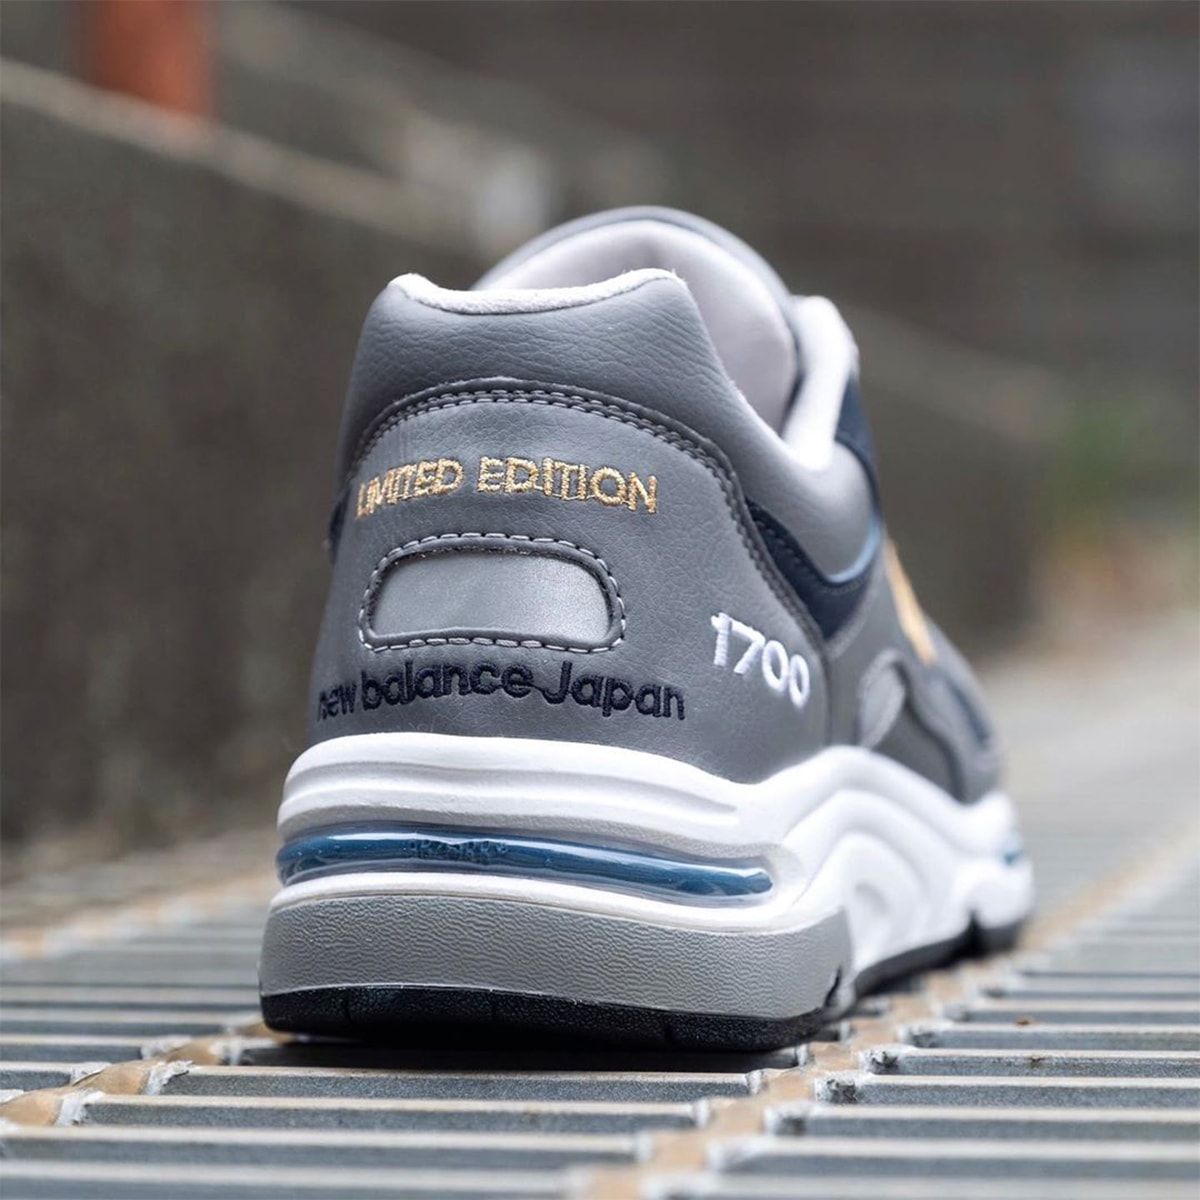 The Original Japan-Exclusive New Balance 1700 Returns this Month | House of  Heat°